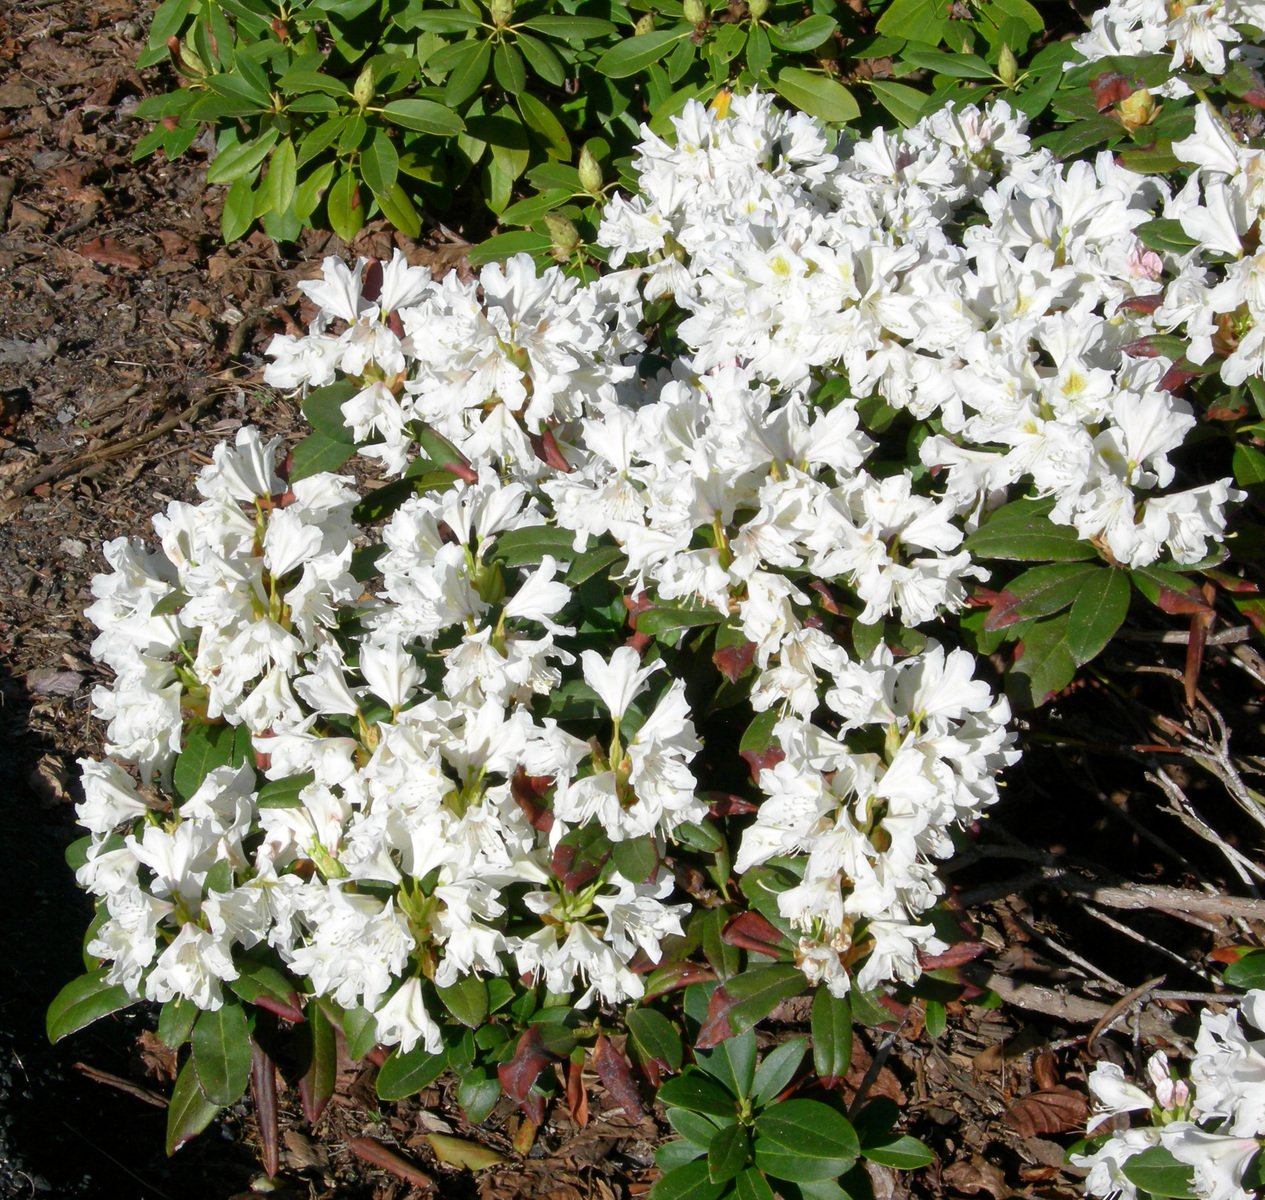 white flowers are blooming in the ground near some grass